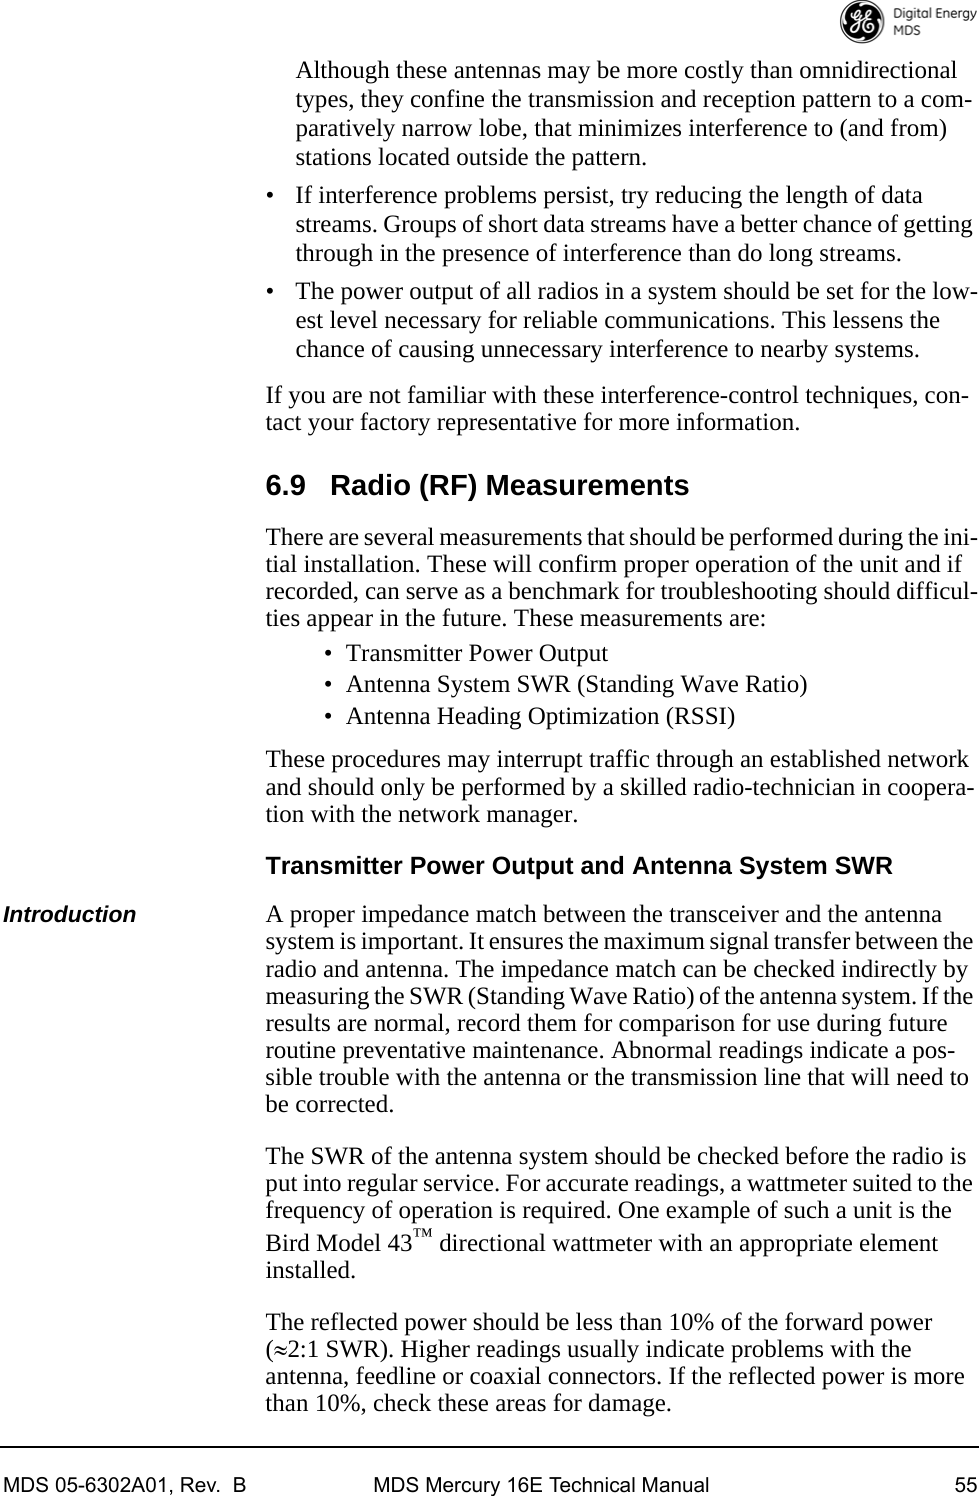 MDS 05-6302A01, Rev.  B MDS Mercury 16E Technical Manual 55Although these antennas may be more costly than omnidirectional types, they confine the transmission and reception pattern to a com-paratively narrow lobe, that minimizes interference to (and from) stations located outside the pattern.• If interference problems persist, try reducing the length of data streams. Groups of short data streams have a better chance of getting through in the presence of interference than do long streams.• The power output of all radios in a system should be set for the low-est level necessary for reliable communications. This lessens the chance of causing unnecessary interference to nearby systems.If you are not familiar with these interference-control techniques, con-tact your factory representative for more information.6.9 Radio (RF) MeasurementsThere are several measurements that should be performed during the ini-tial installation. These will confirm proper operation of the unit and if recorded, can serve as a benchmark for troubleshooting should difficul-ties appear in the future. These measurements are:• Transmitter Power Output• Antenna System SWR (Standing Wave Ratio)• Antenna Heading Optimization (RSSI)These procedures may interrupt traffic through an established network and should only be performed by a skilled radio-technician in coopera-tion with the network manager.Transmitter Power Output and Antenna System SWRIntroduction A proper impedance match between the transceiver and the antenna system is important. It ensures the maximum signal transfer between the radio and antenna. The impedance match can be checked indirectly by measuring the SWR (Standing Wave Ratio) of the antenna system. If the results are normal, record them for comparison for use during future routine preventative maintenance. Abnormal readings indicate a pos-sible trouble with the antenna or the transmission line that will need to be corrected.The SWR of the antenna system should be checked before the radio is put into regular service. For accurate readings, a wattmeter suited to the frequency of operation is required. One example of such a unit is the Bird Model 43™ directional wattmeter with an appropriate element installed.The reflected power should be less than 10% of the forward power (2:1 SWR). Higher readings usually indicate problems with the antenna, feedline or coaxial connectors. If the reflected power is more than 10%, check these areas for damage.